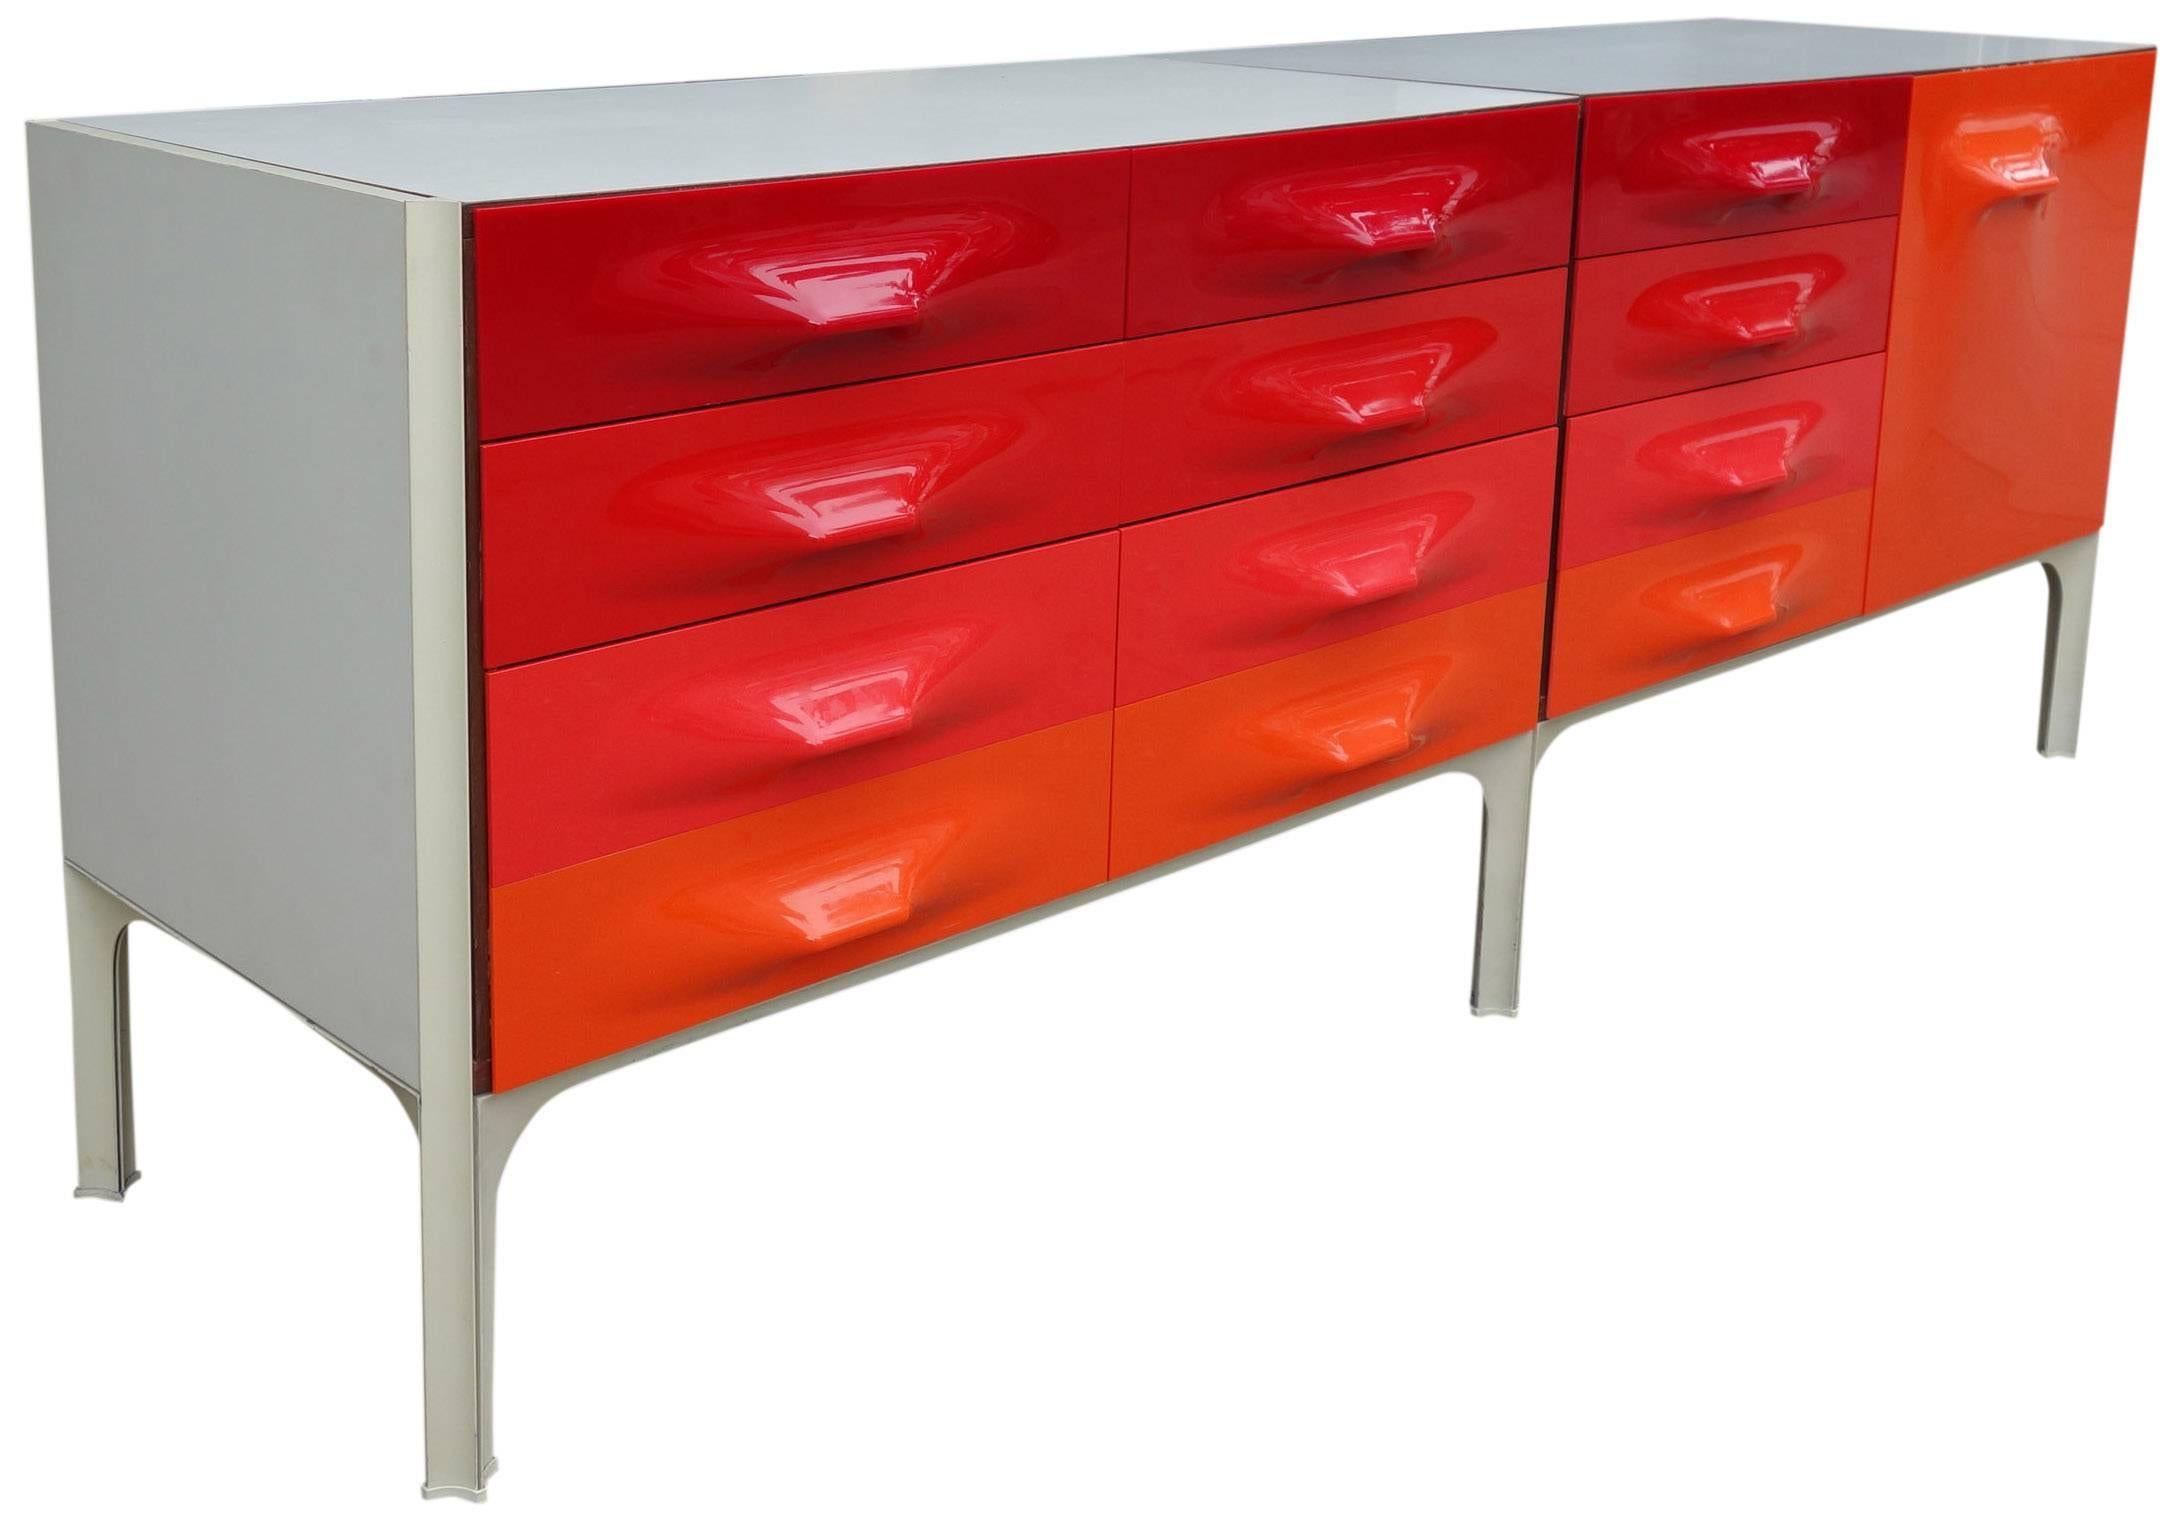 Mid-Century Raymond Loewy DF-2000 credenza for Doubinsky Frères, France. Hard to find red front panels. All glides present and front panels showing minimal wear. Excellent example. Two case pieces easily bolt together and separate for shipping. (as